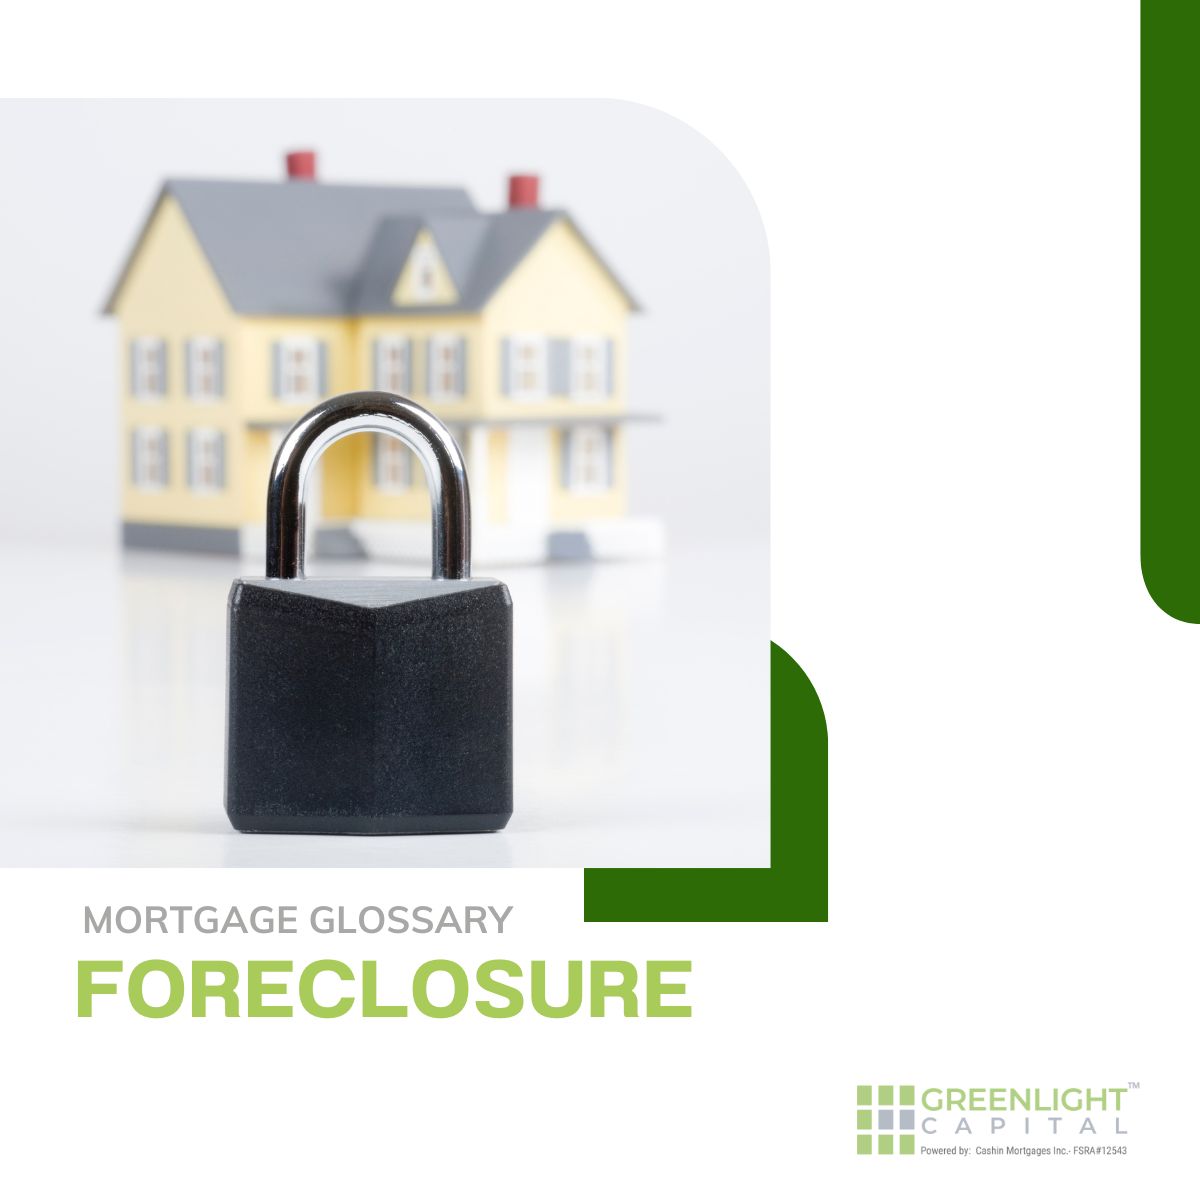 Demystifying foreclosure in real estate. 🏡💼 Foreclosure happens when a homeowner defaults on mortgage payments, leading to the lender seizing the property.

#Foreclosure #RealEstate #MortgageTerms #HomeOwnership #PropertyInvestment  #Gogreenlightloans #greenlightcapital